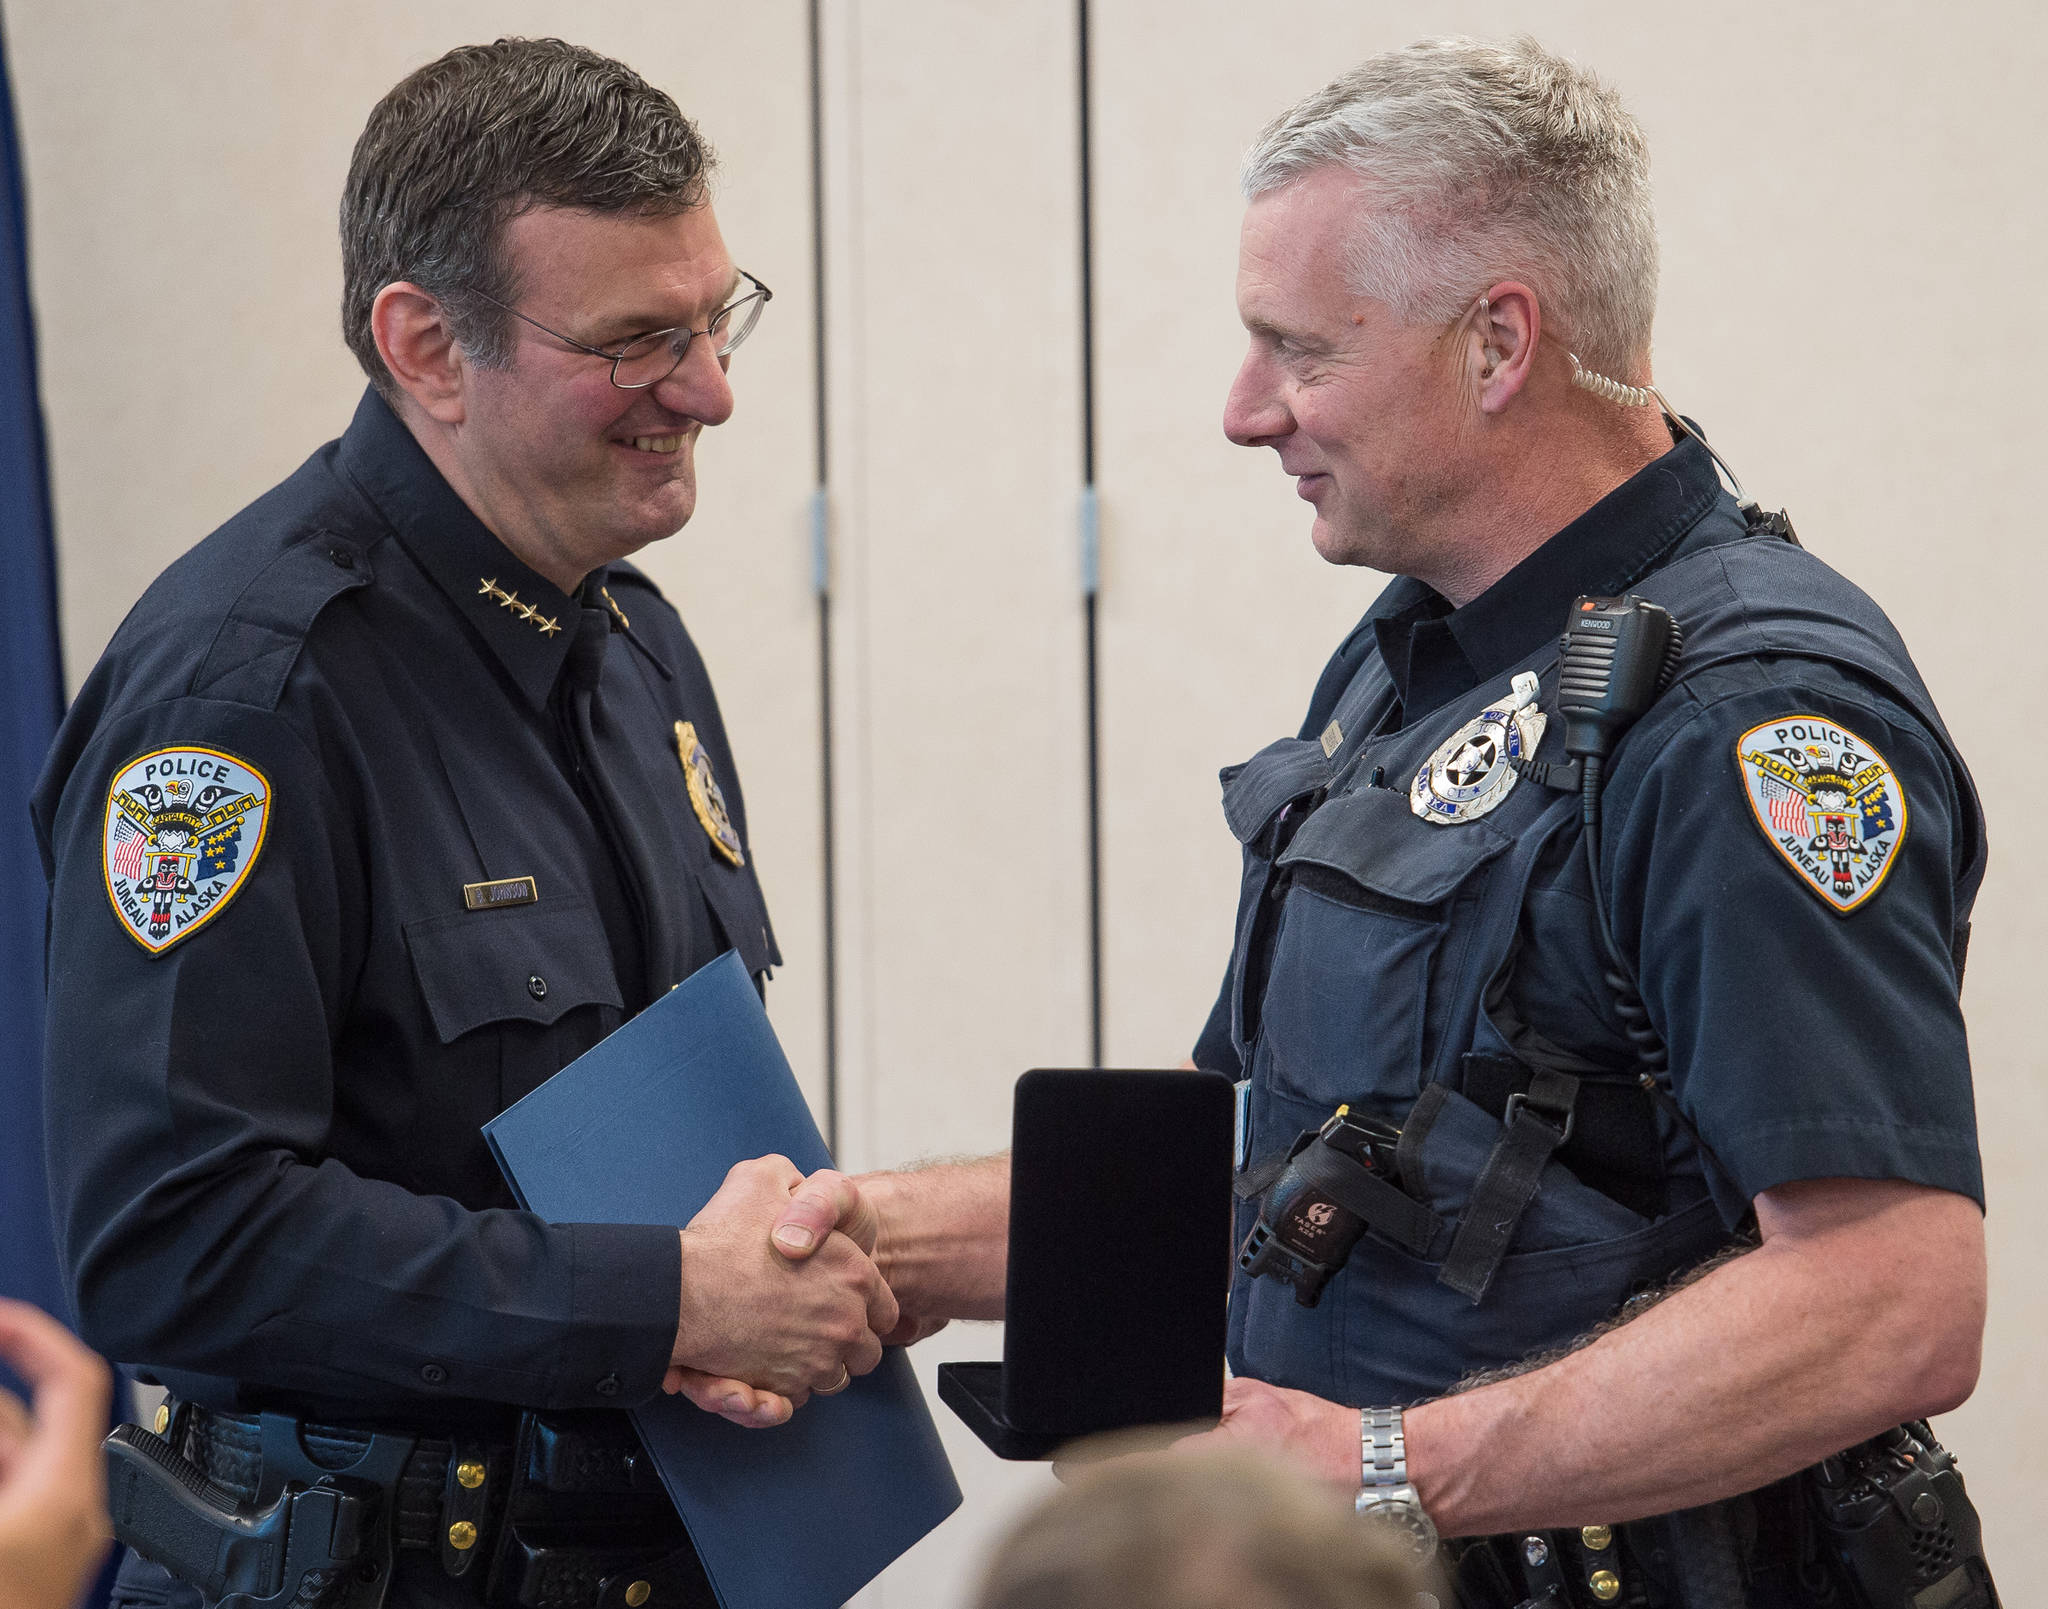 Juneau Chief of Police Bryce Johnson, left, hands out a Lifesaving Award to Officer James Esbenshade during the Juneau Police Department’s quarterly awards ceremony on Monday, July 24, 2017. Juneau Chief of Police Bryce Johnson, left, hands out a Lifesaving Award to Officer James Esbenshade during the Juneau Police Department’s quarterly awards ceremony on Monday, July 24, 2017.